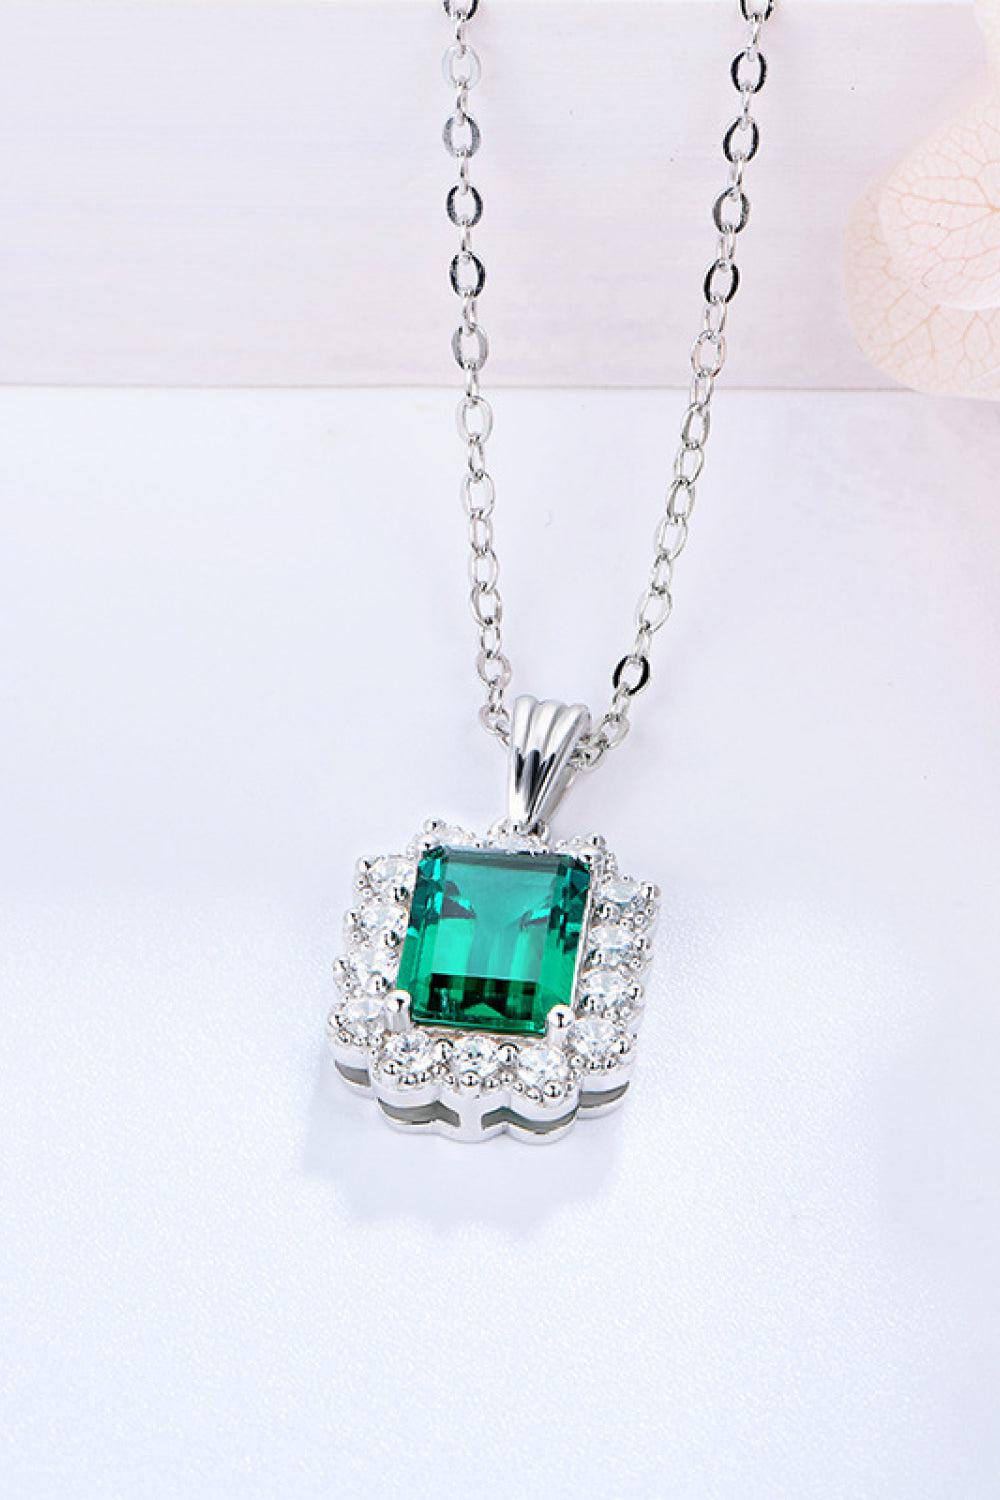 1.5 Carat Lab-Grown Emerald Pendant 925 Sterling Silver Necklace BLUE ZONE PLANET